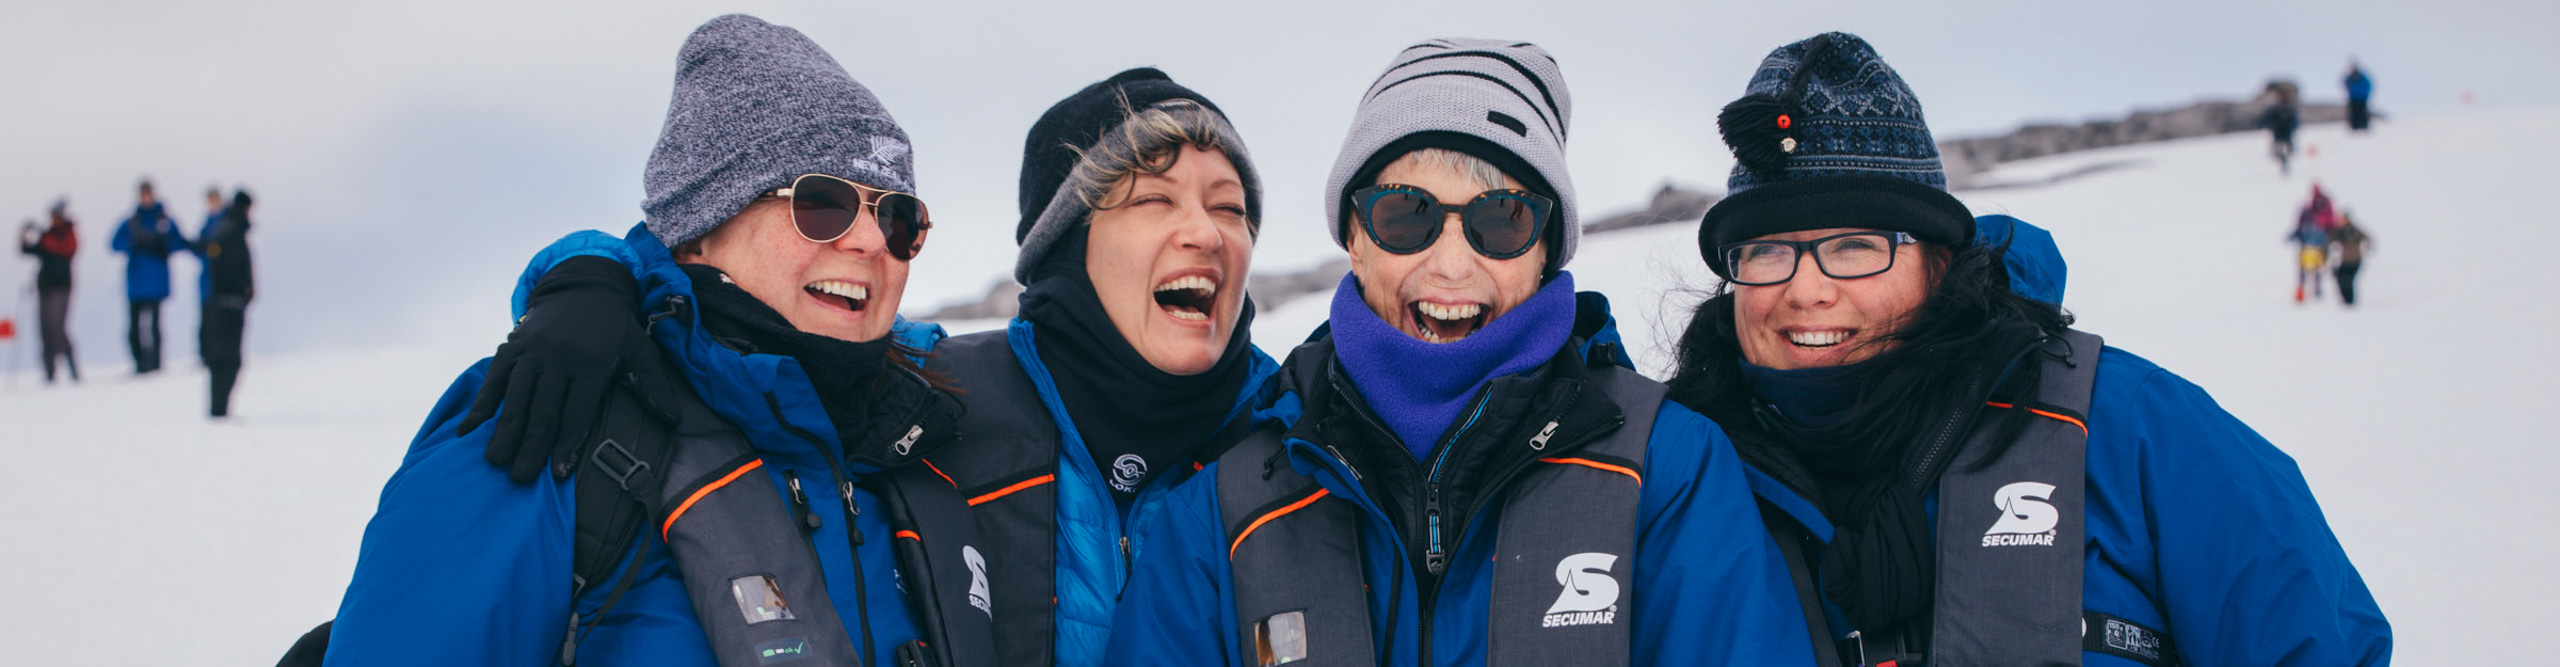 Group laughing and smiling at the camera in the snow, Antarctica